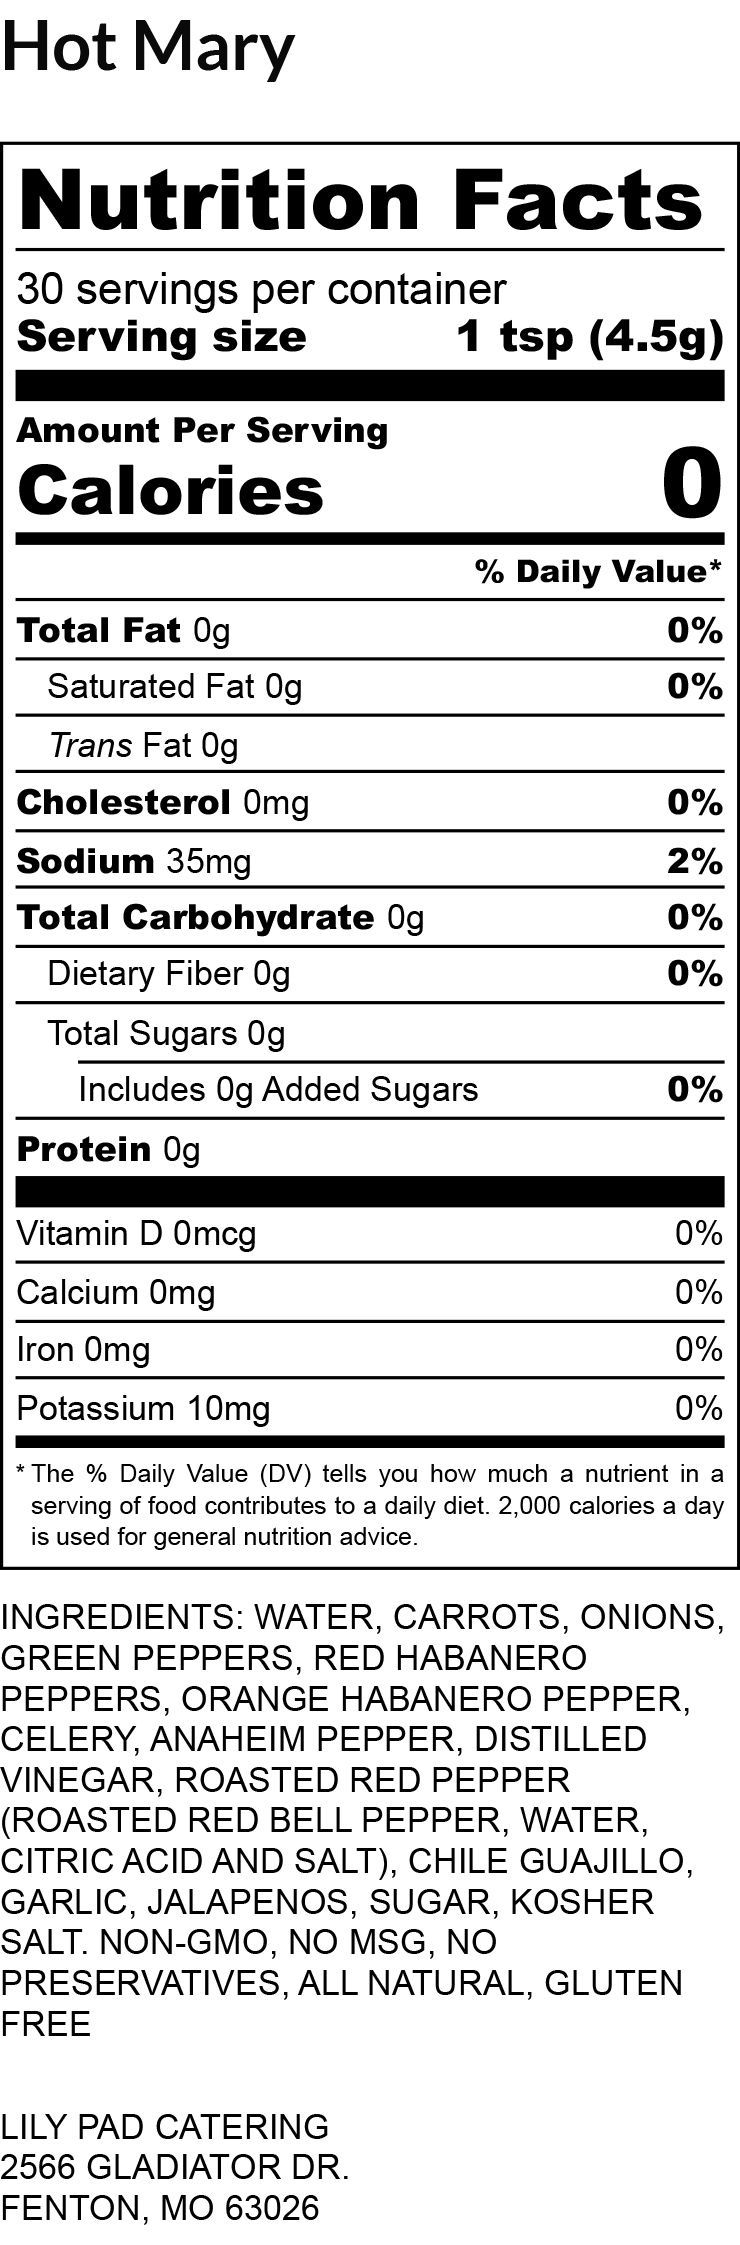 Hot Mary - Nutrition Label